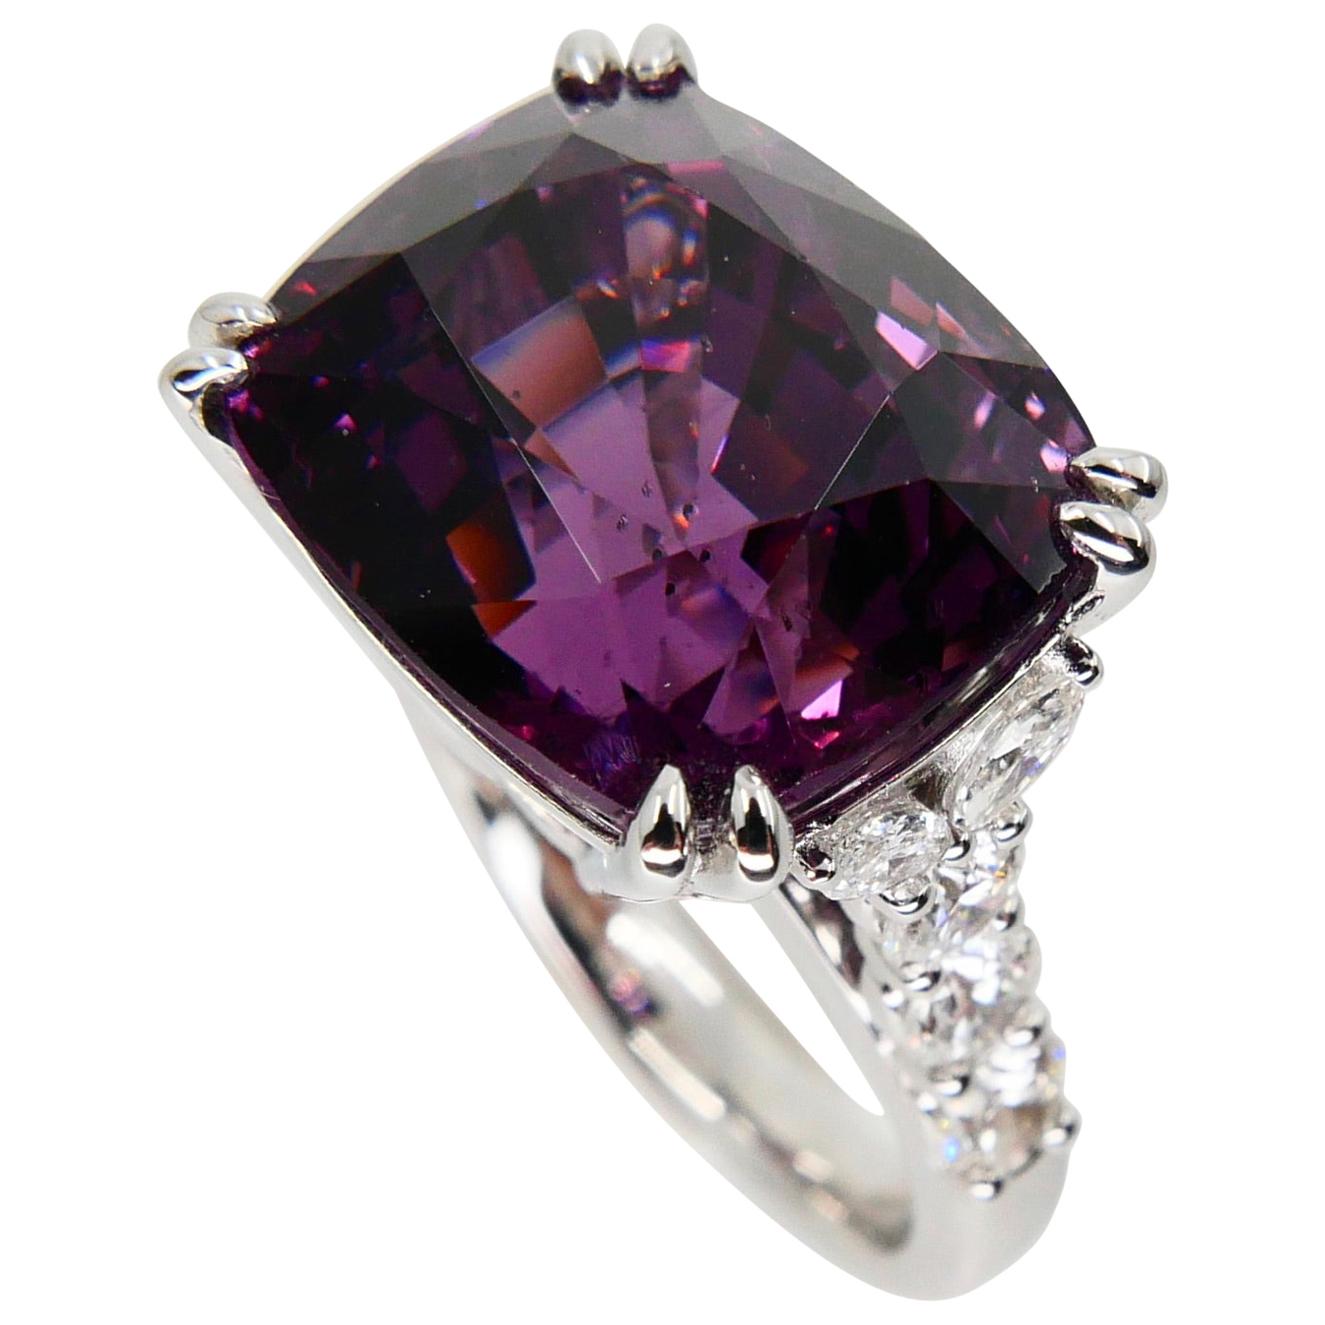 AIGS Certified 15.22 Carat Natural Spinel & Diamond Cocktail Ring, Burma No Heat For Sale